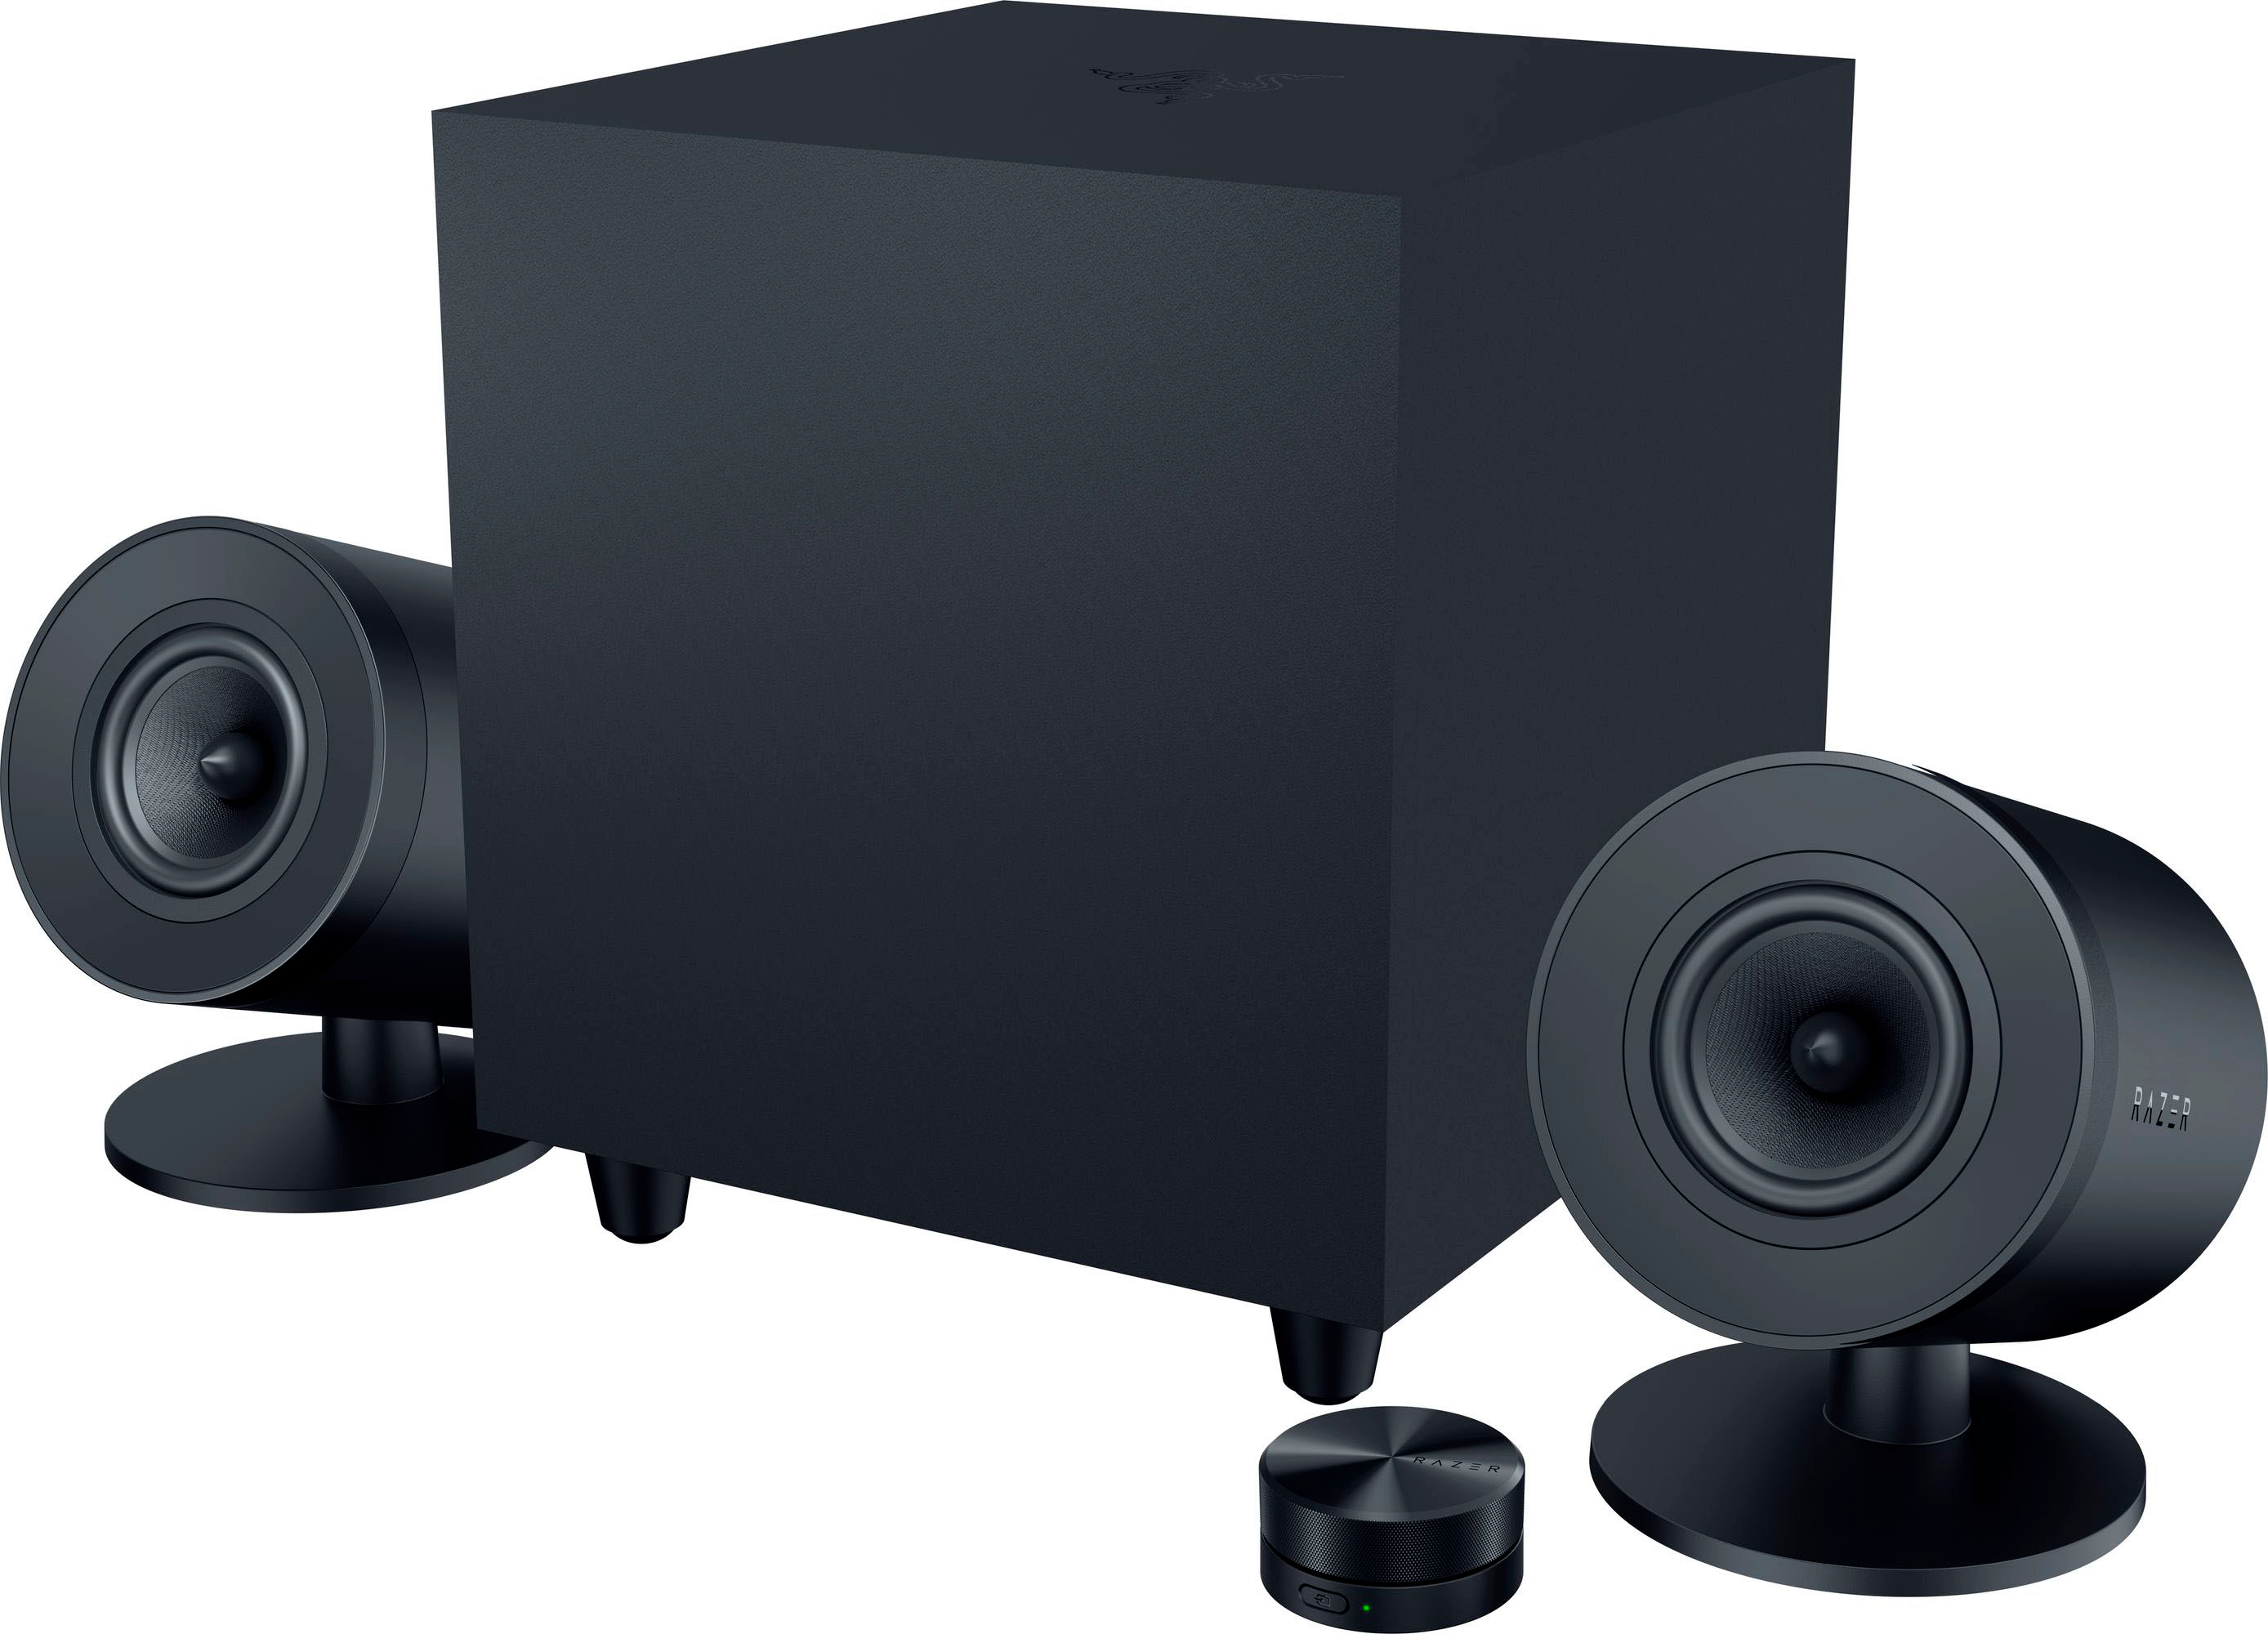 Angle View: Razer - Nommo V2 Pro Full-Range 2.1 PC Gaming Speakers with Wireless Subwoofer (4 Piece) - Black